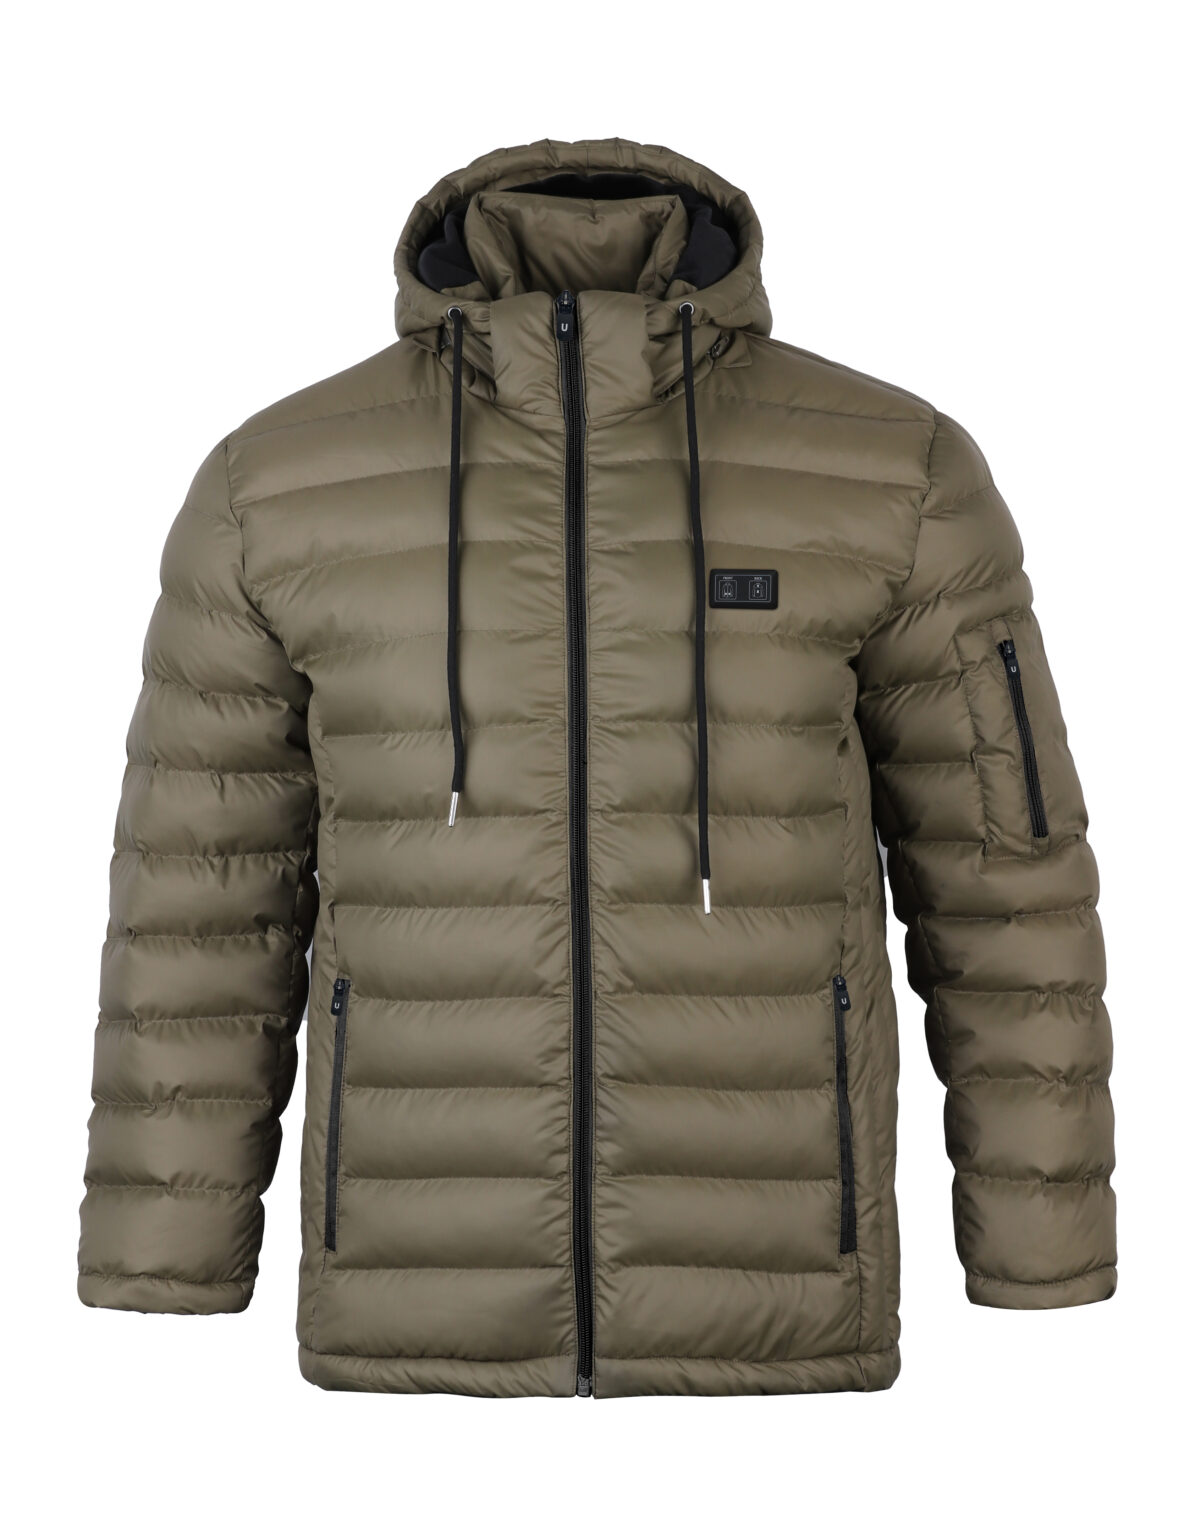 HELIOS - The Heated Coat - PAFFUTO Style For Men - Army Green - Helios ...